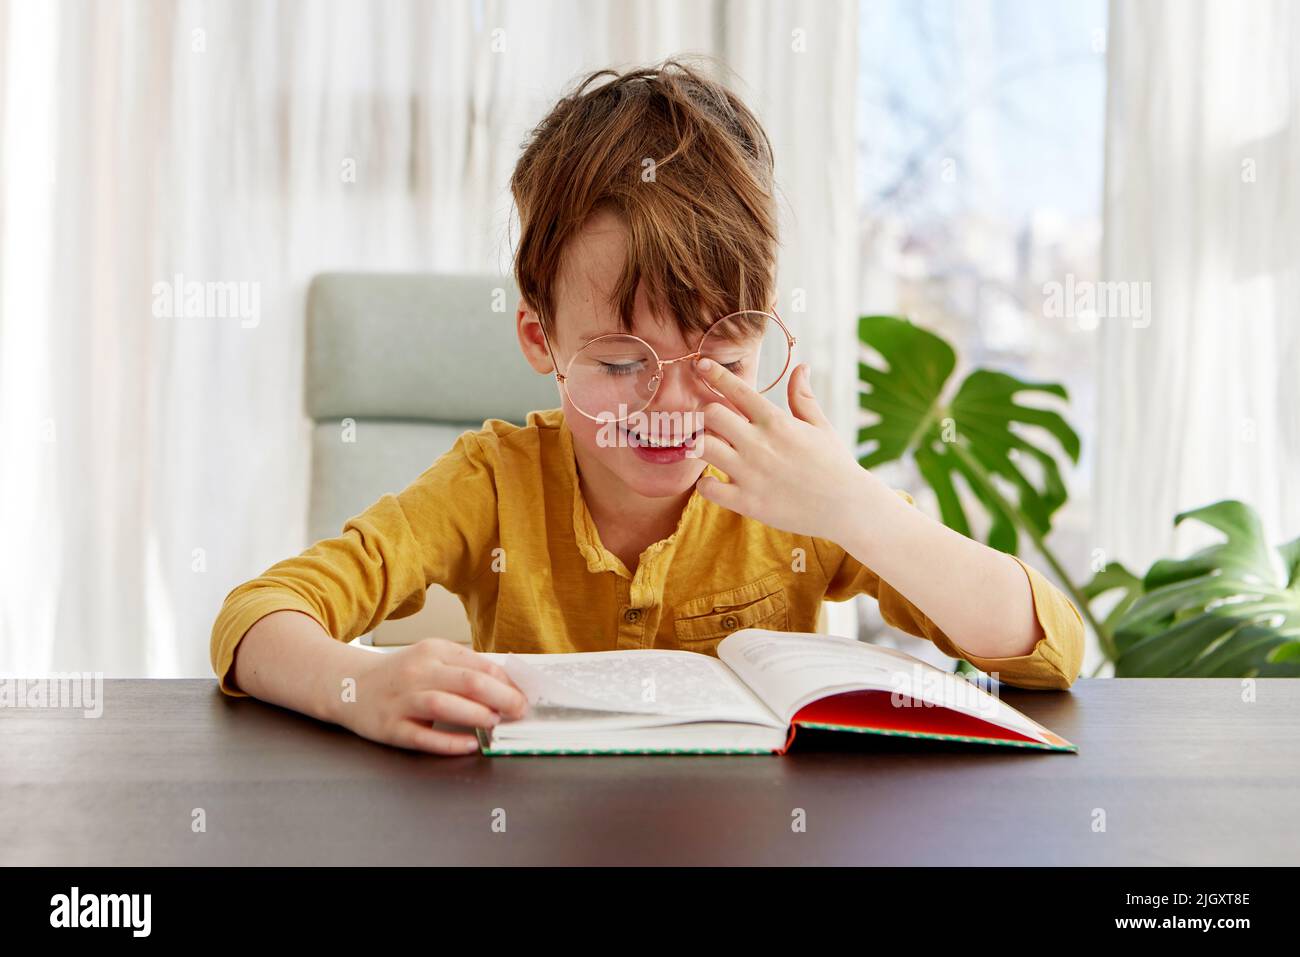 Smart boy reading book and smiling daytime Stock Photo